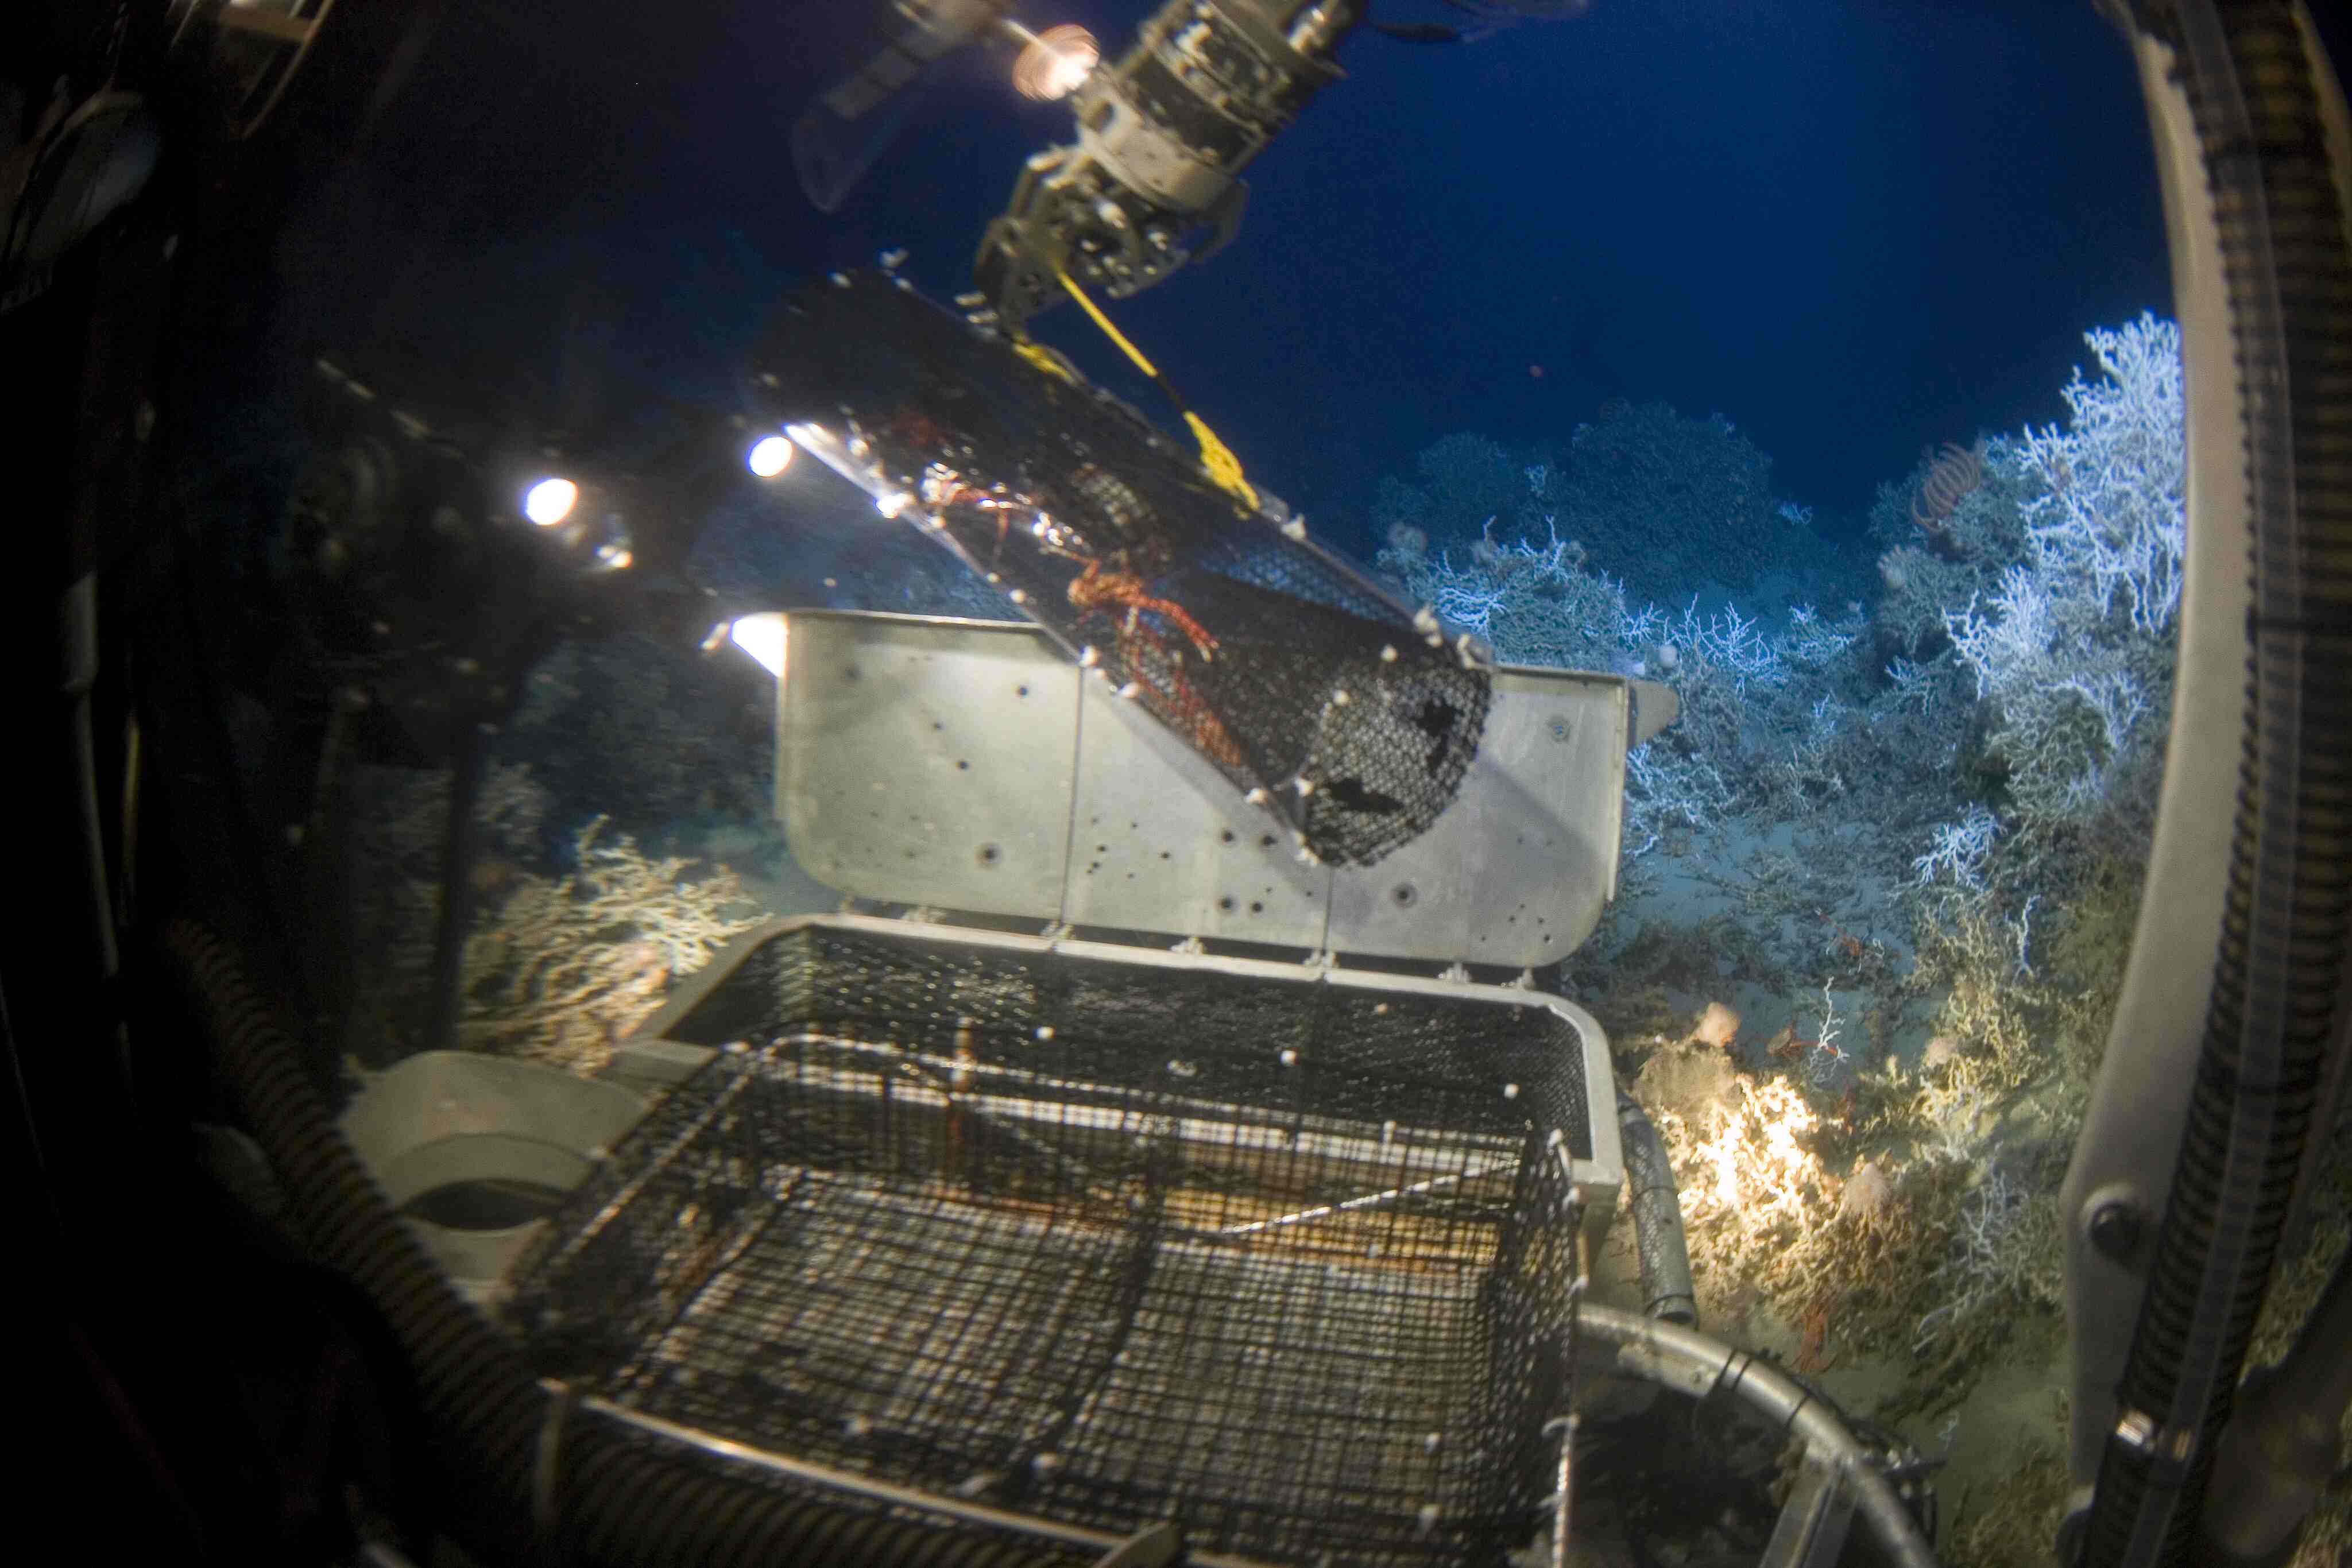 How Has Ocean Exploration Increased Scientific Understanding And Influenced Technology?